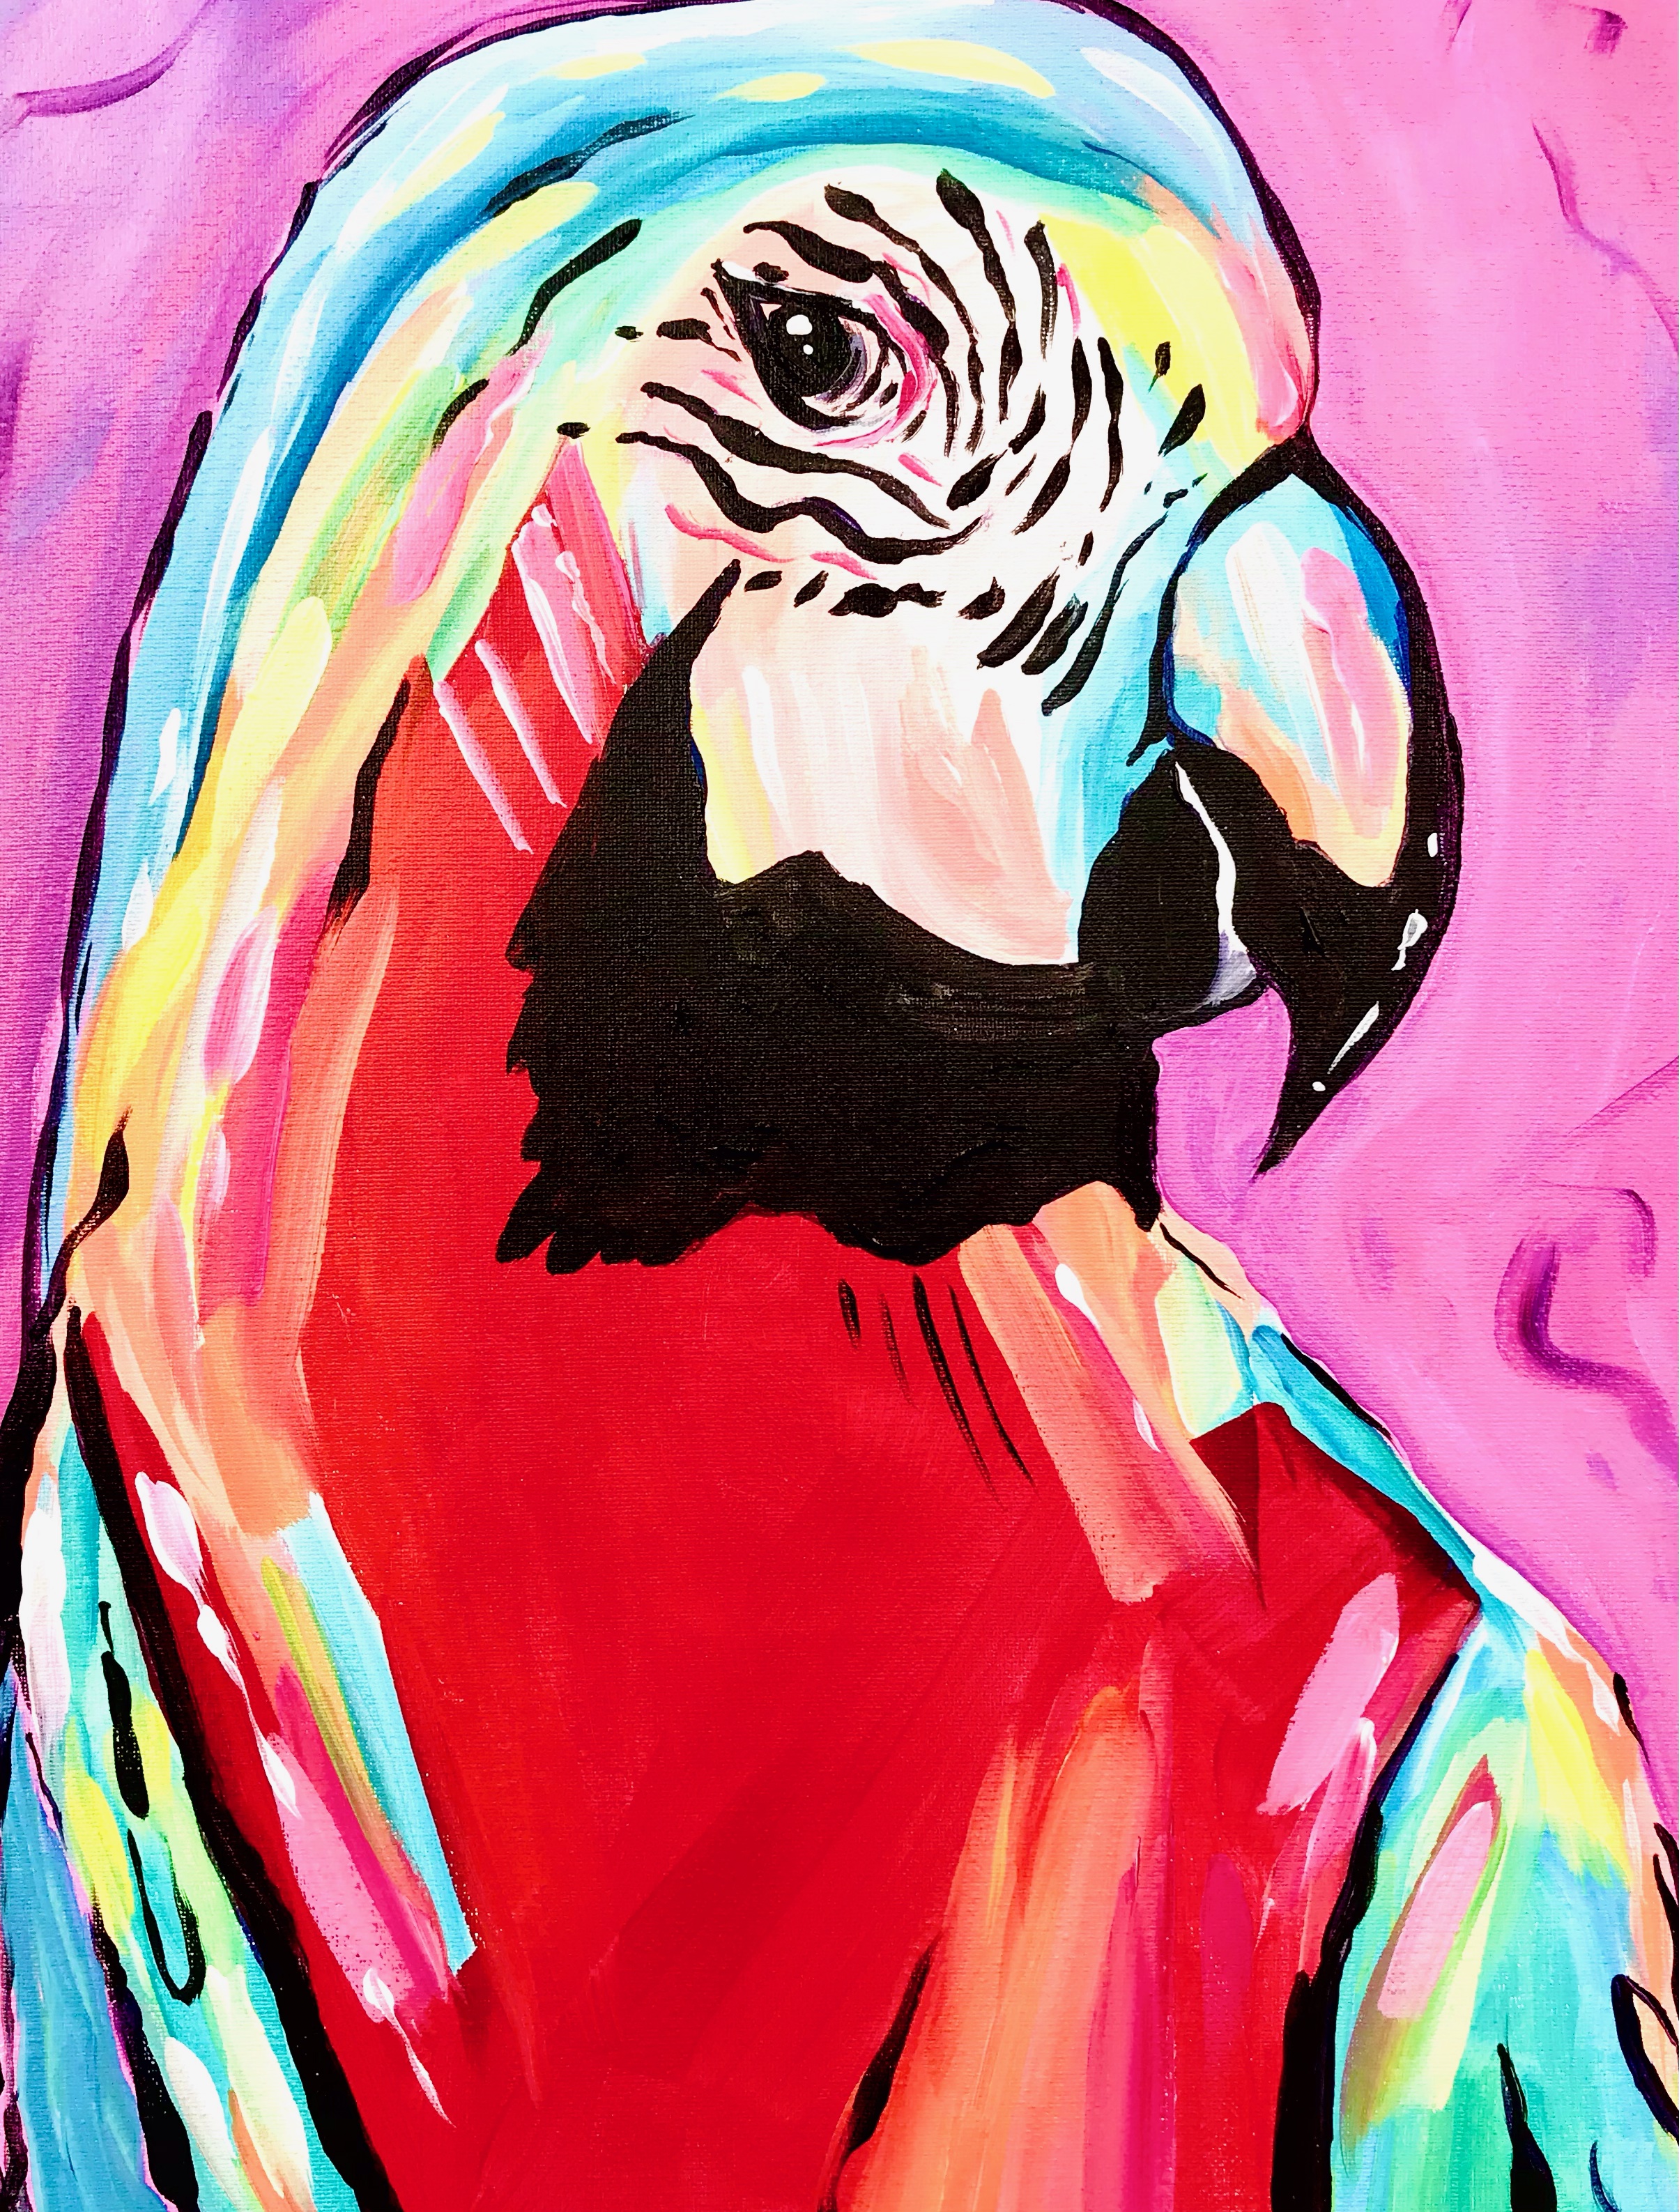 A Rainbow Parrot experience project by Yaymaker